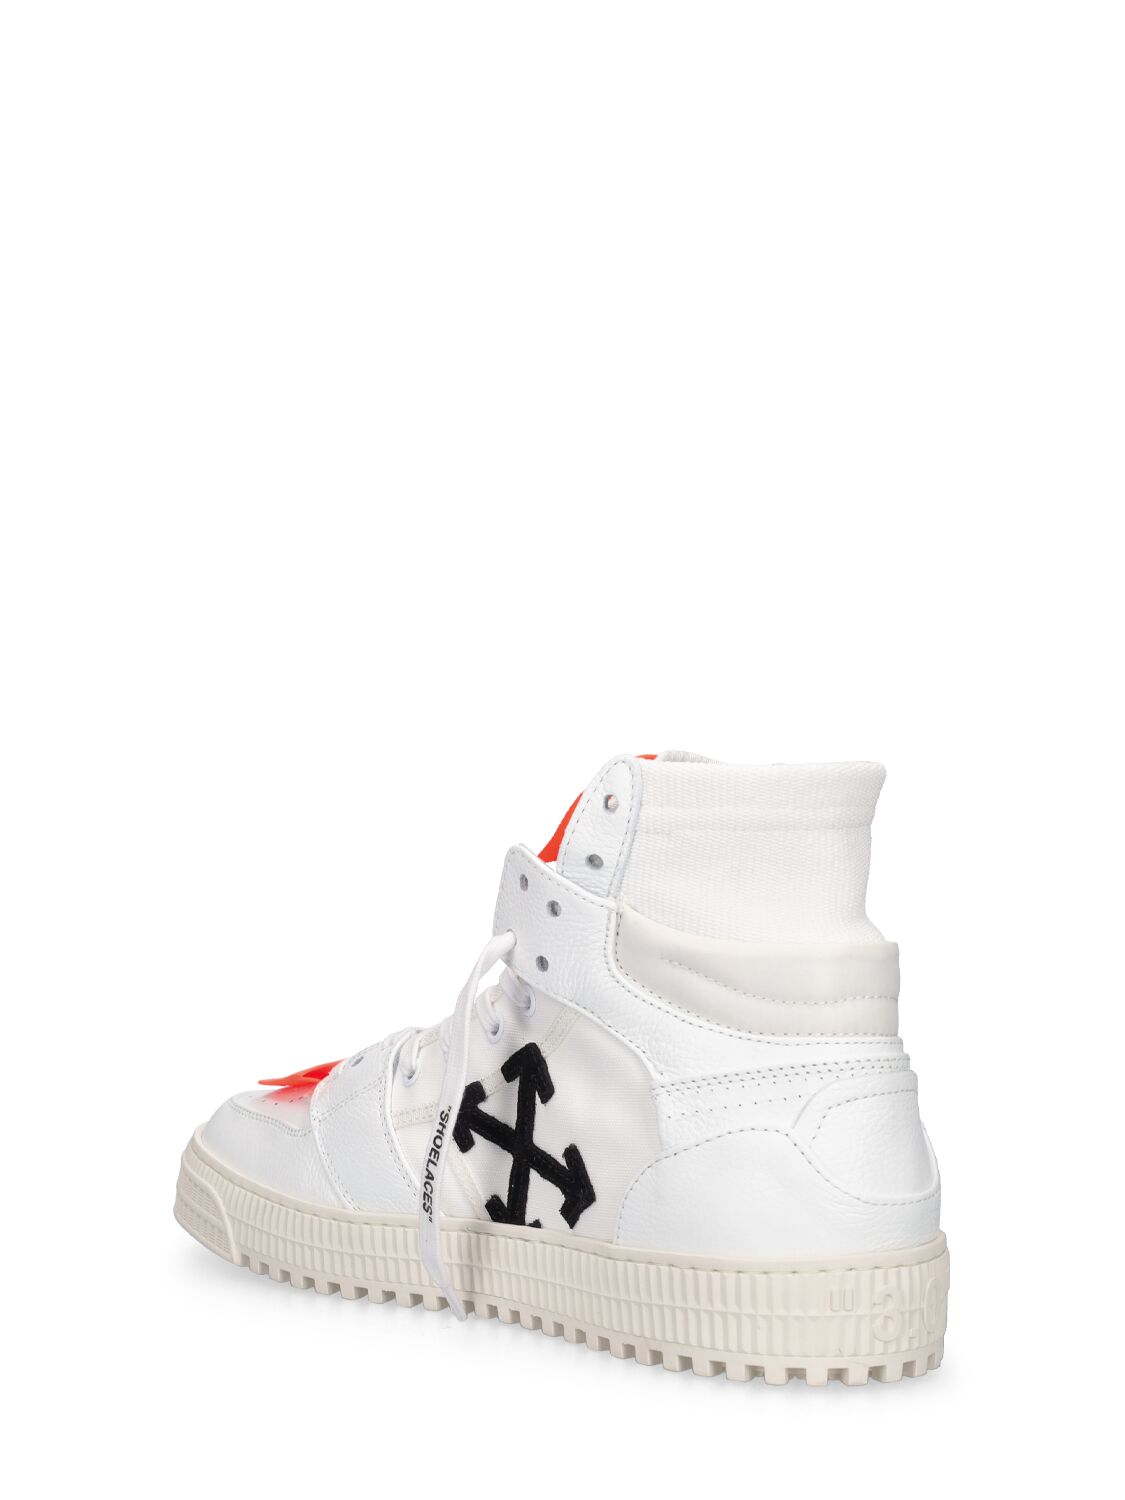 Shop Off-white 20mm 3.0 Off Court High-top Sneakers In White,orange